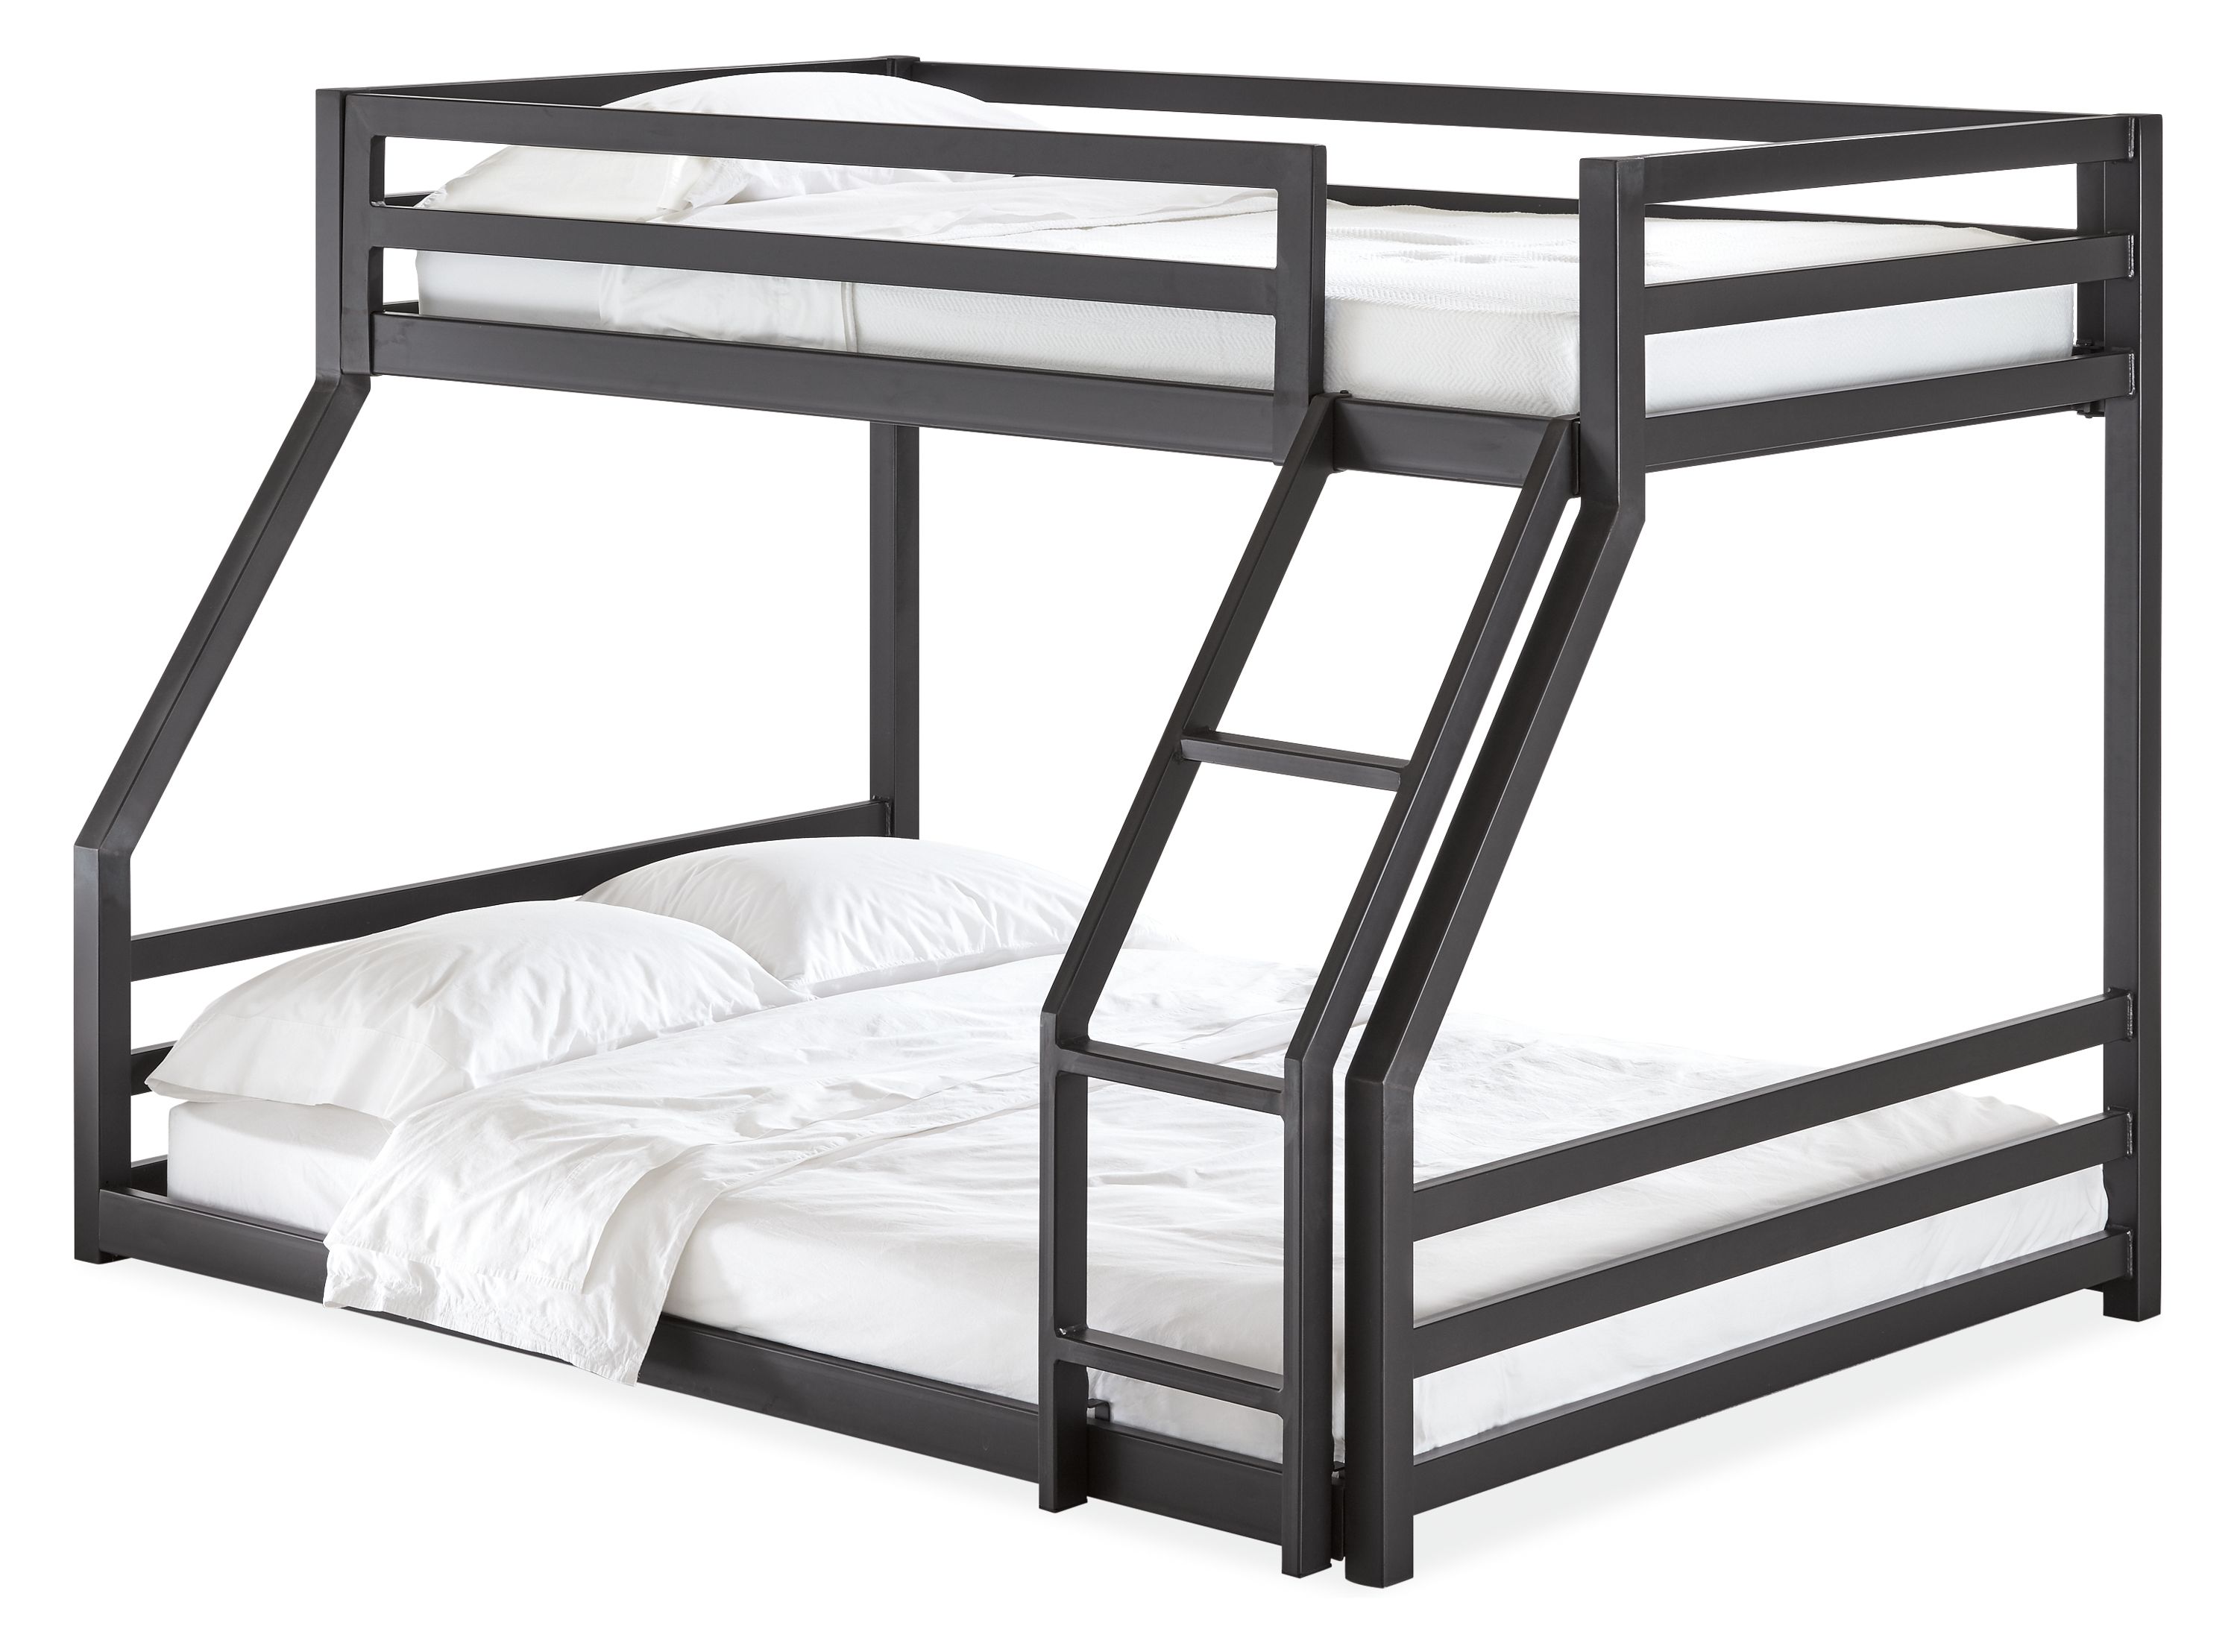 Fort Bunk Beds Modern Kids Furniture, Bunk Bed With Fort Underneath